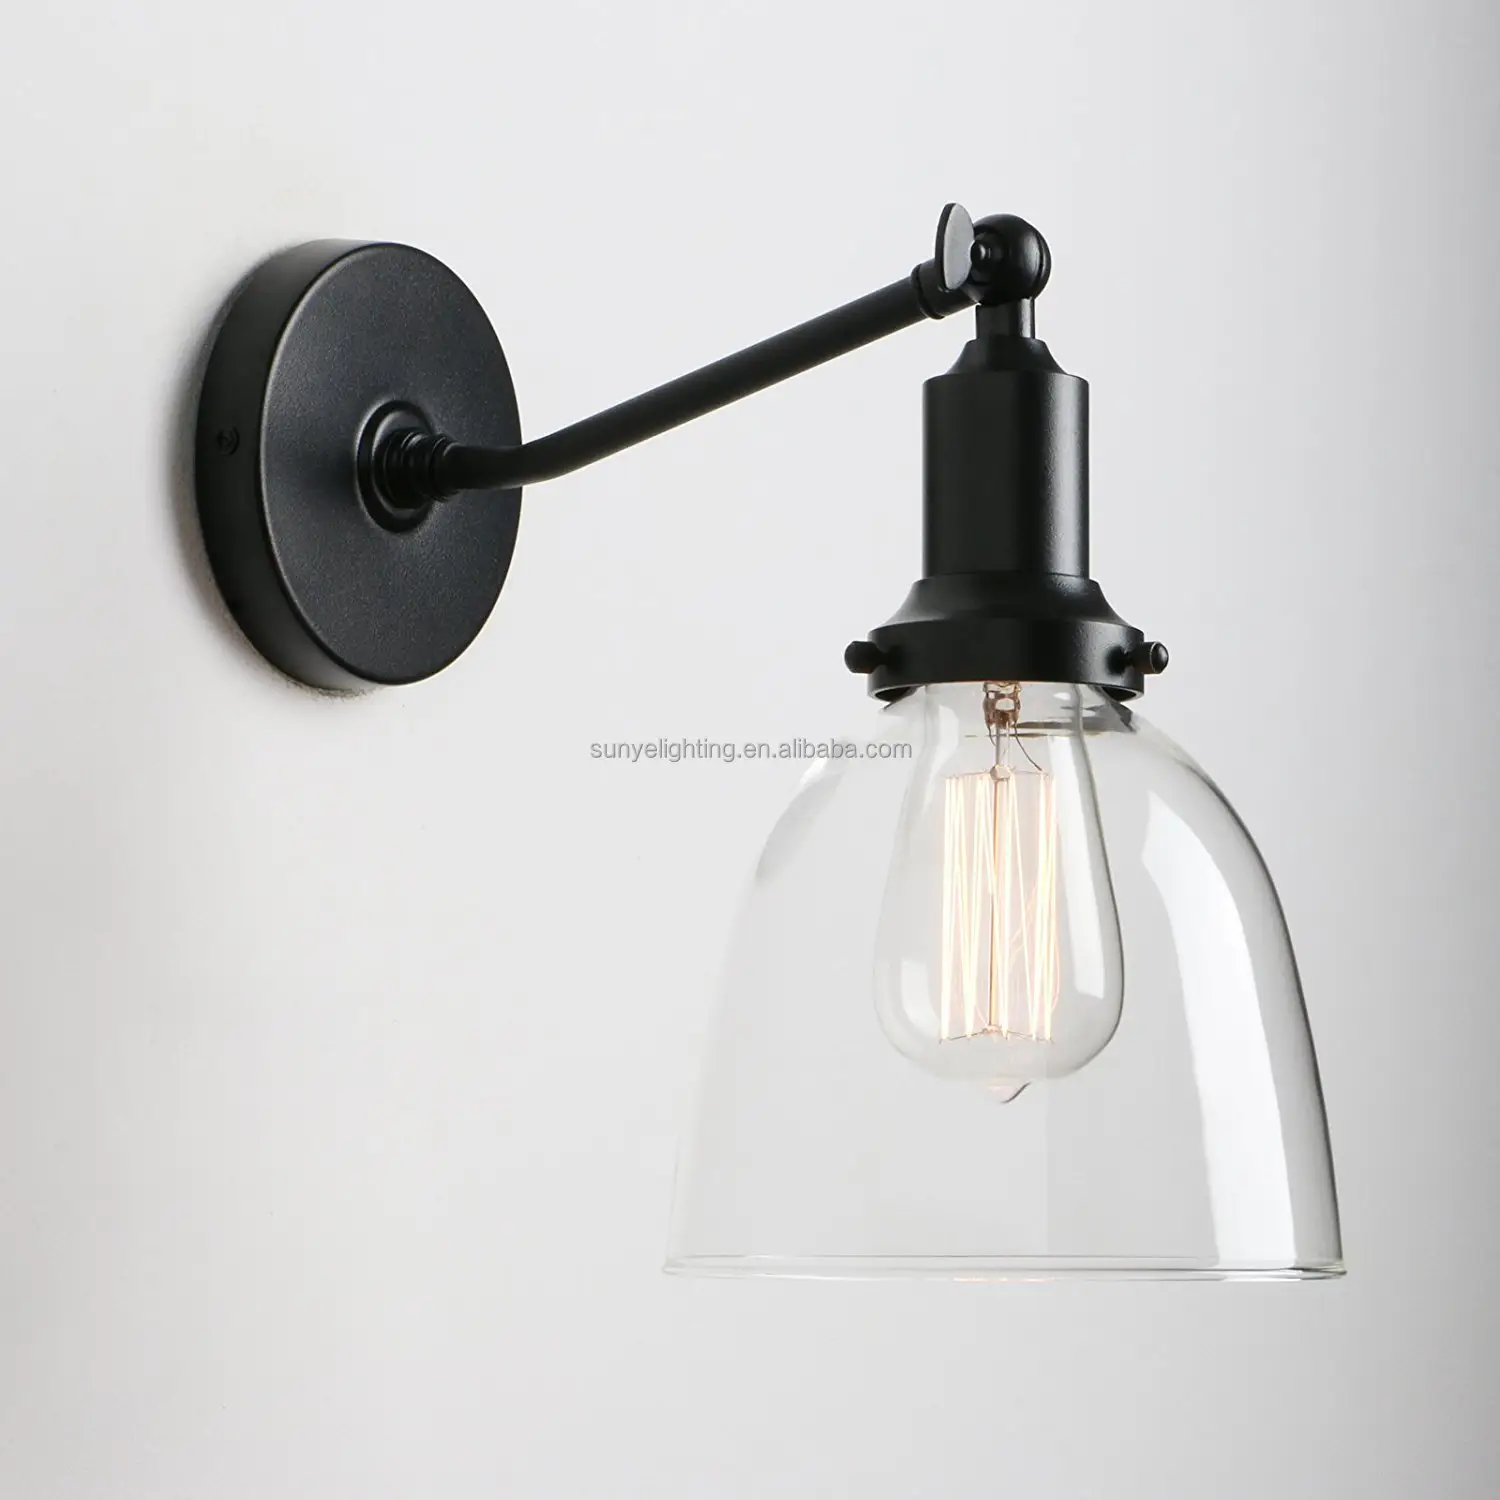 Industrial Vintage Slope Pole Wall Mount Single Sconce with 6.7" Oval Dome Clear Glass Shade Wall Sconce Light Lamp fixture